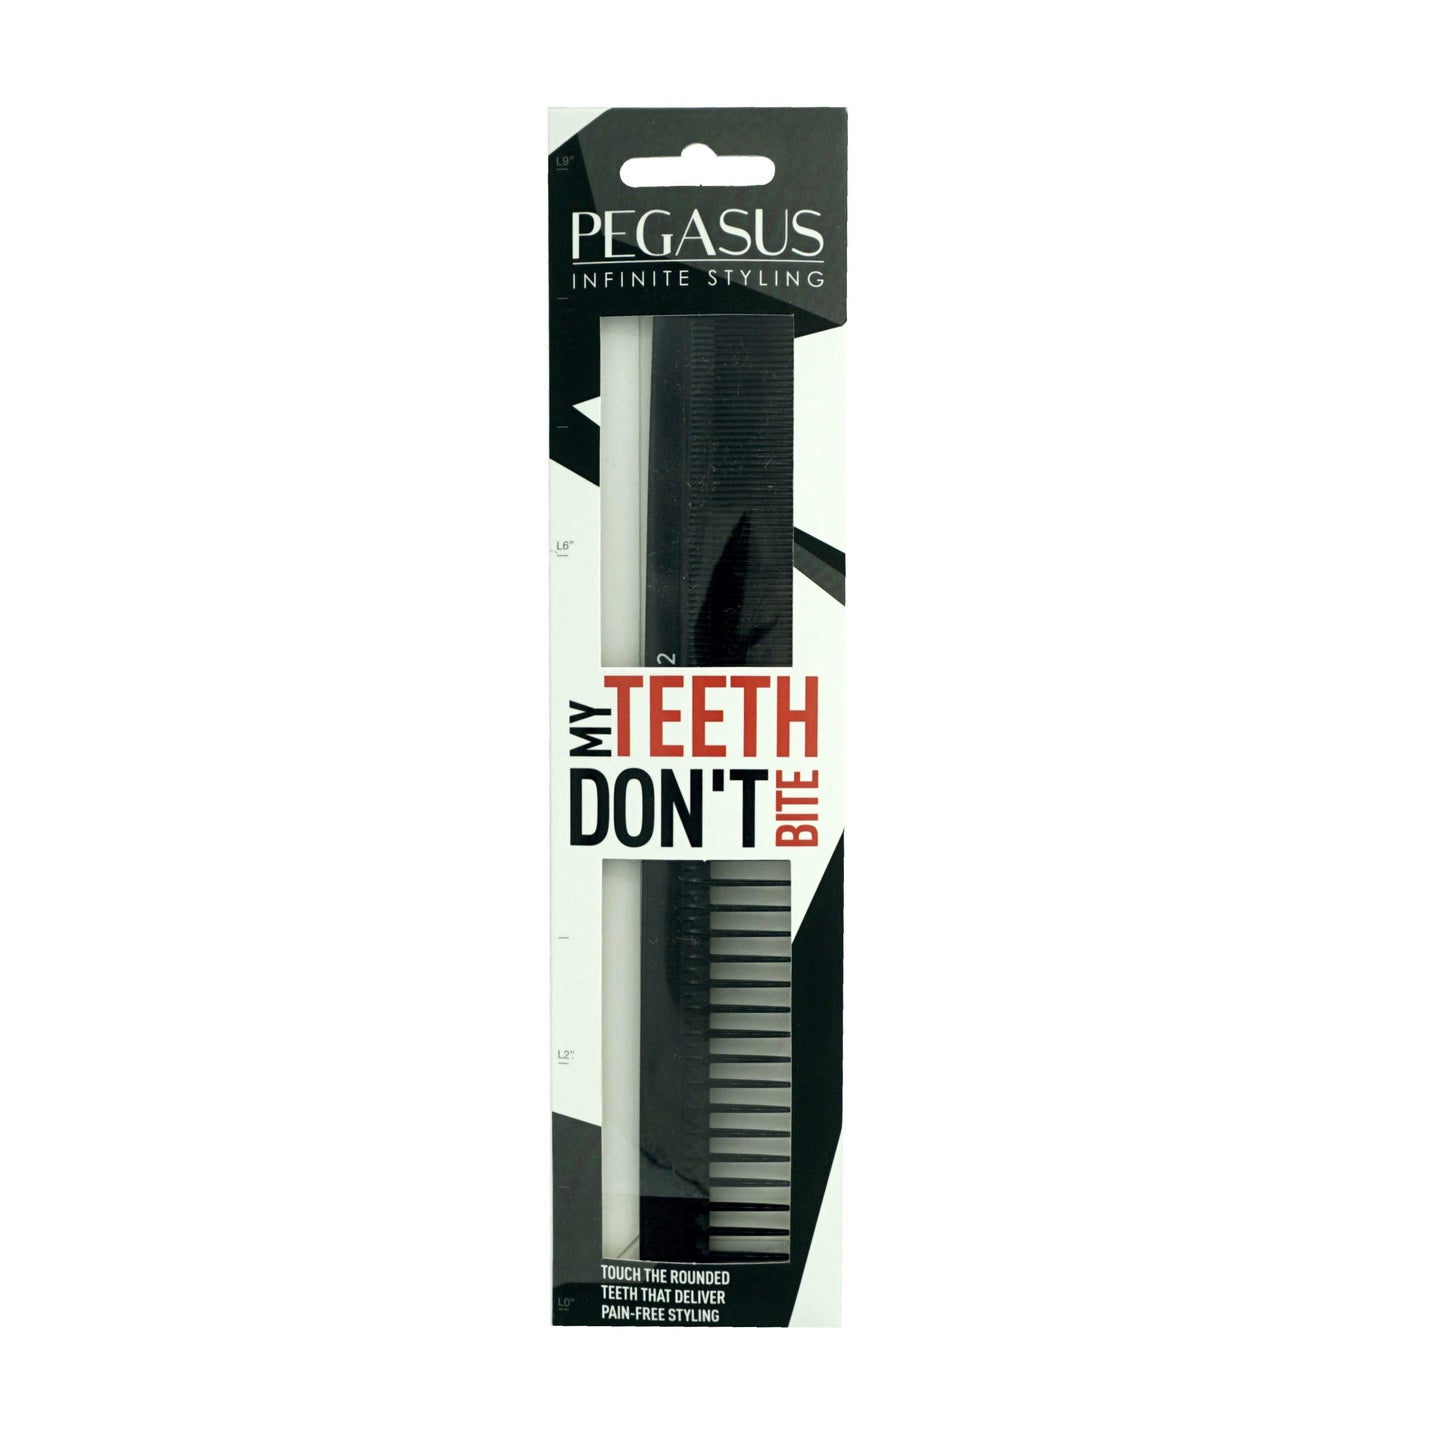 Pegasus 212, 8.25in Hard Rubber Styling Comb with Extra Course and Fine Teeth, Smooth Edges, Anti Static, Heat and Chemically Resistant, Wet Hair, Everyday Grooming Comb | Peines de goma dura - Black